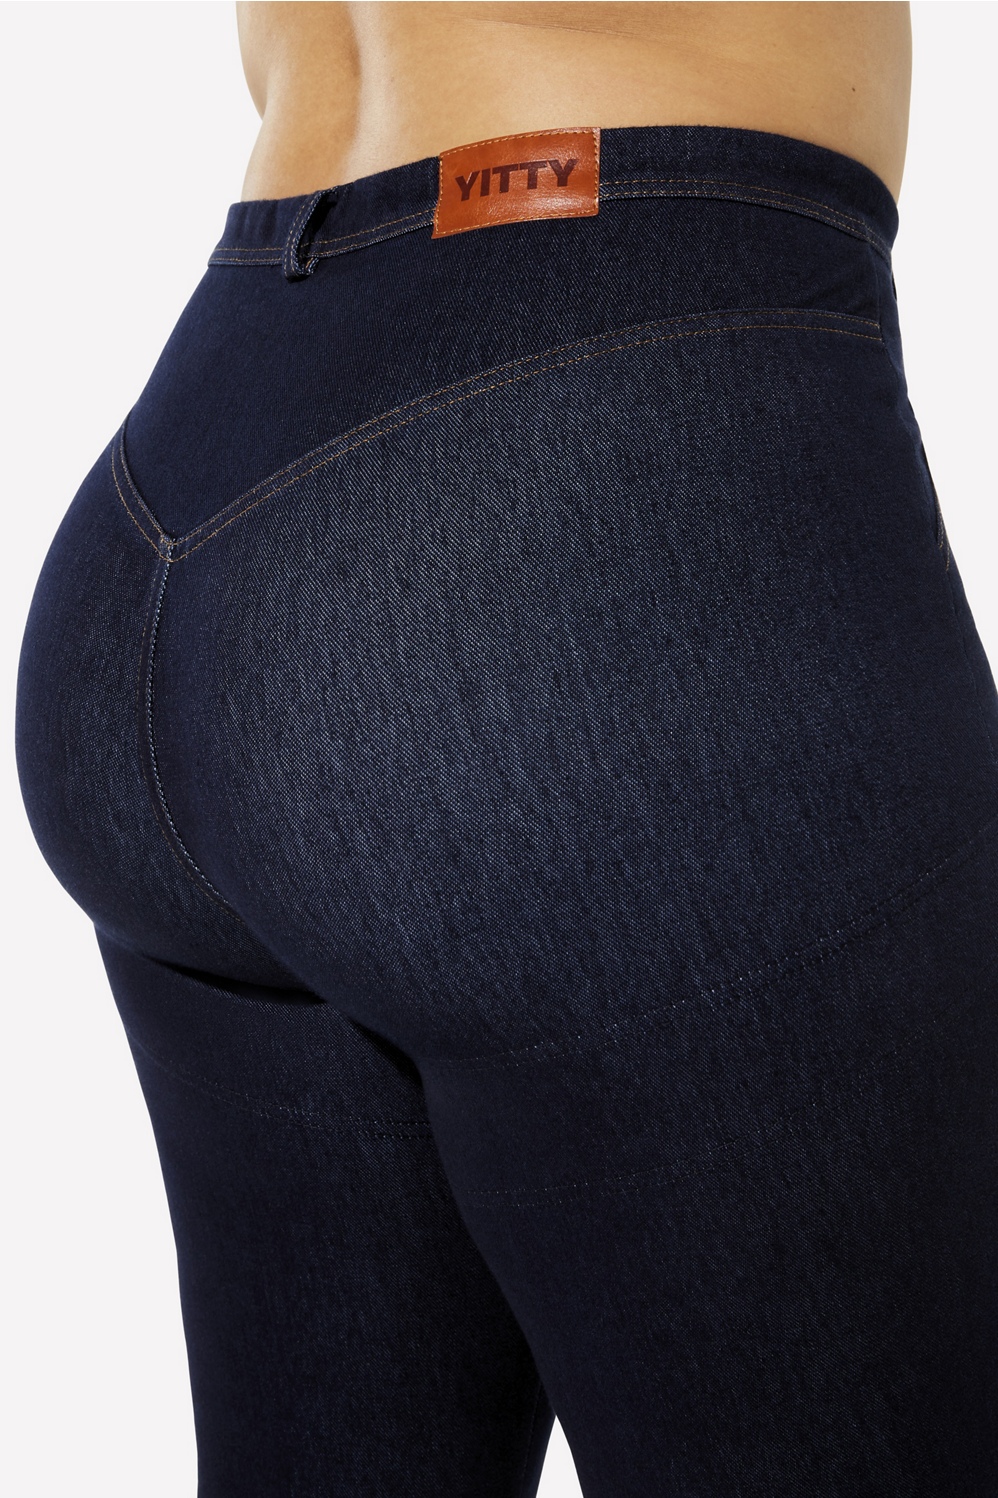 Is Smoothing - Denim Stretch Served Yitty Jean